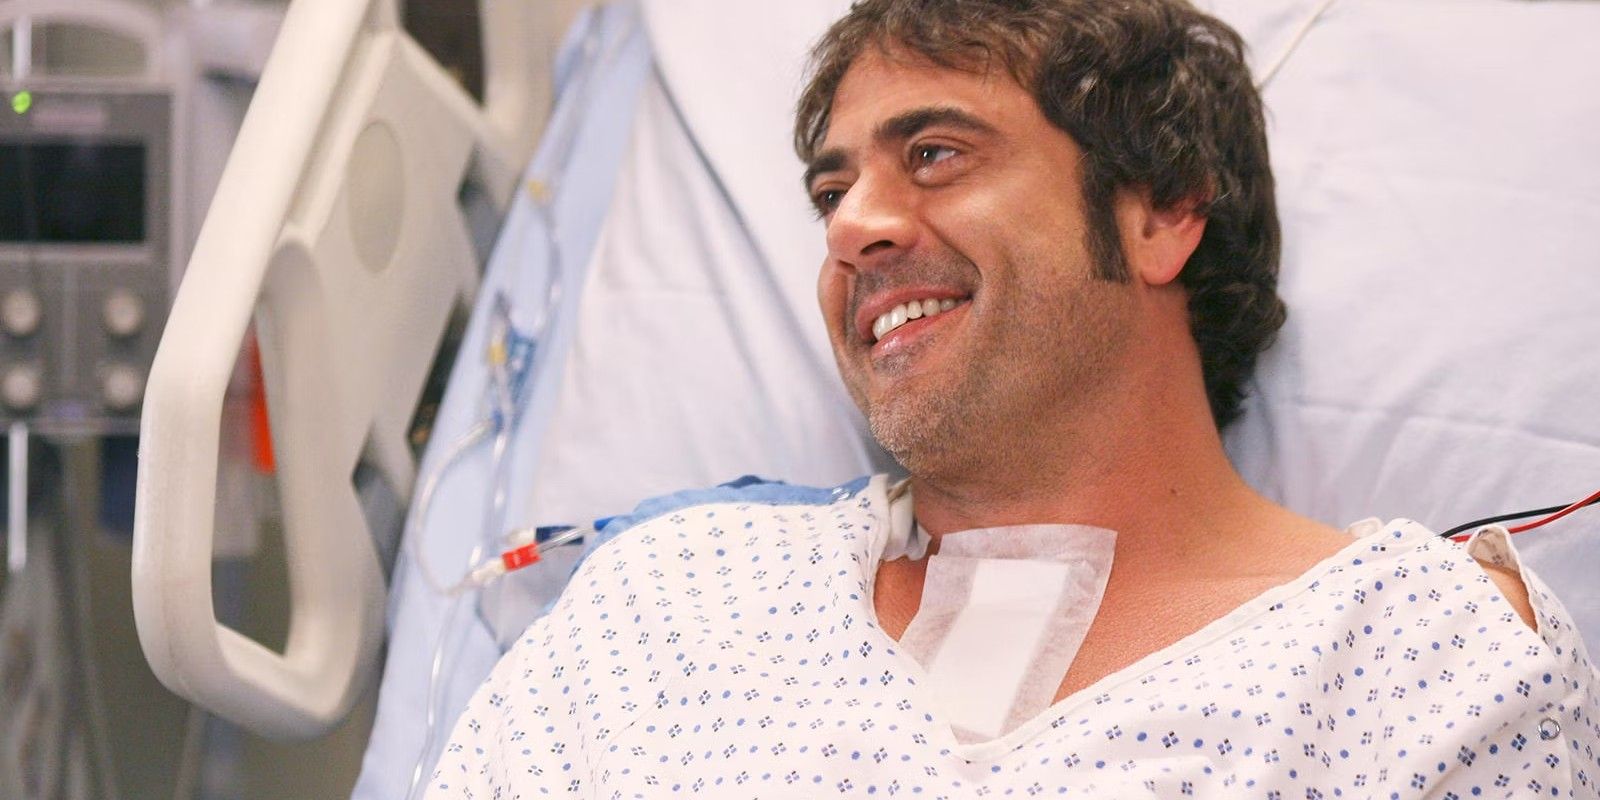 Denny Duquette from Grey's Anatomy